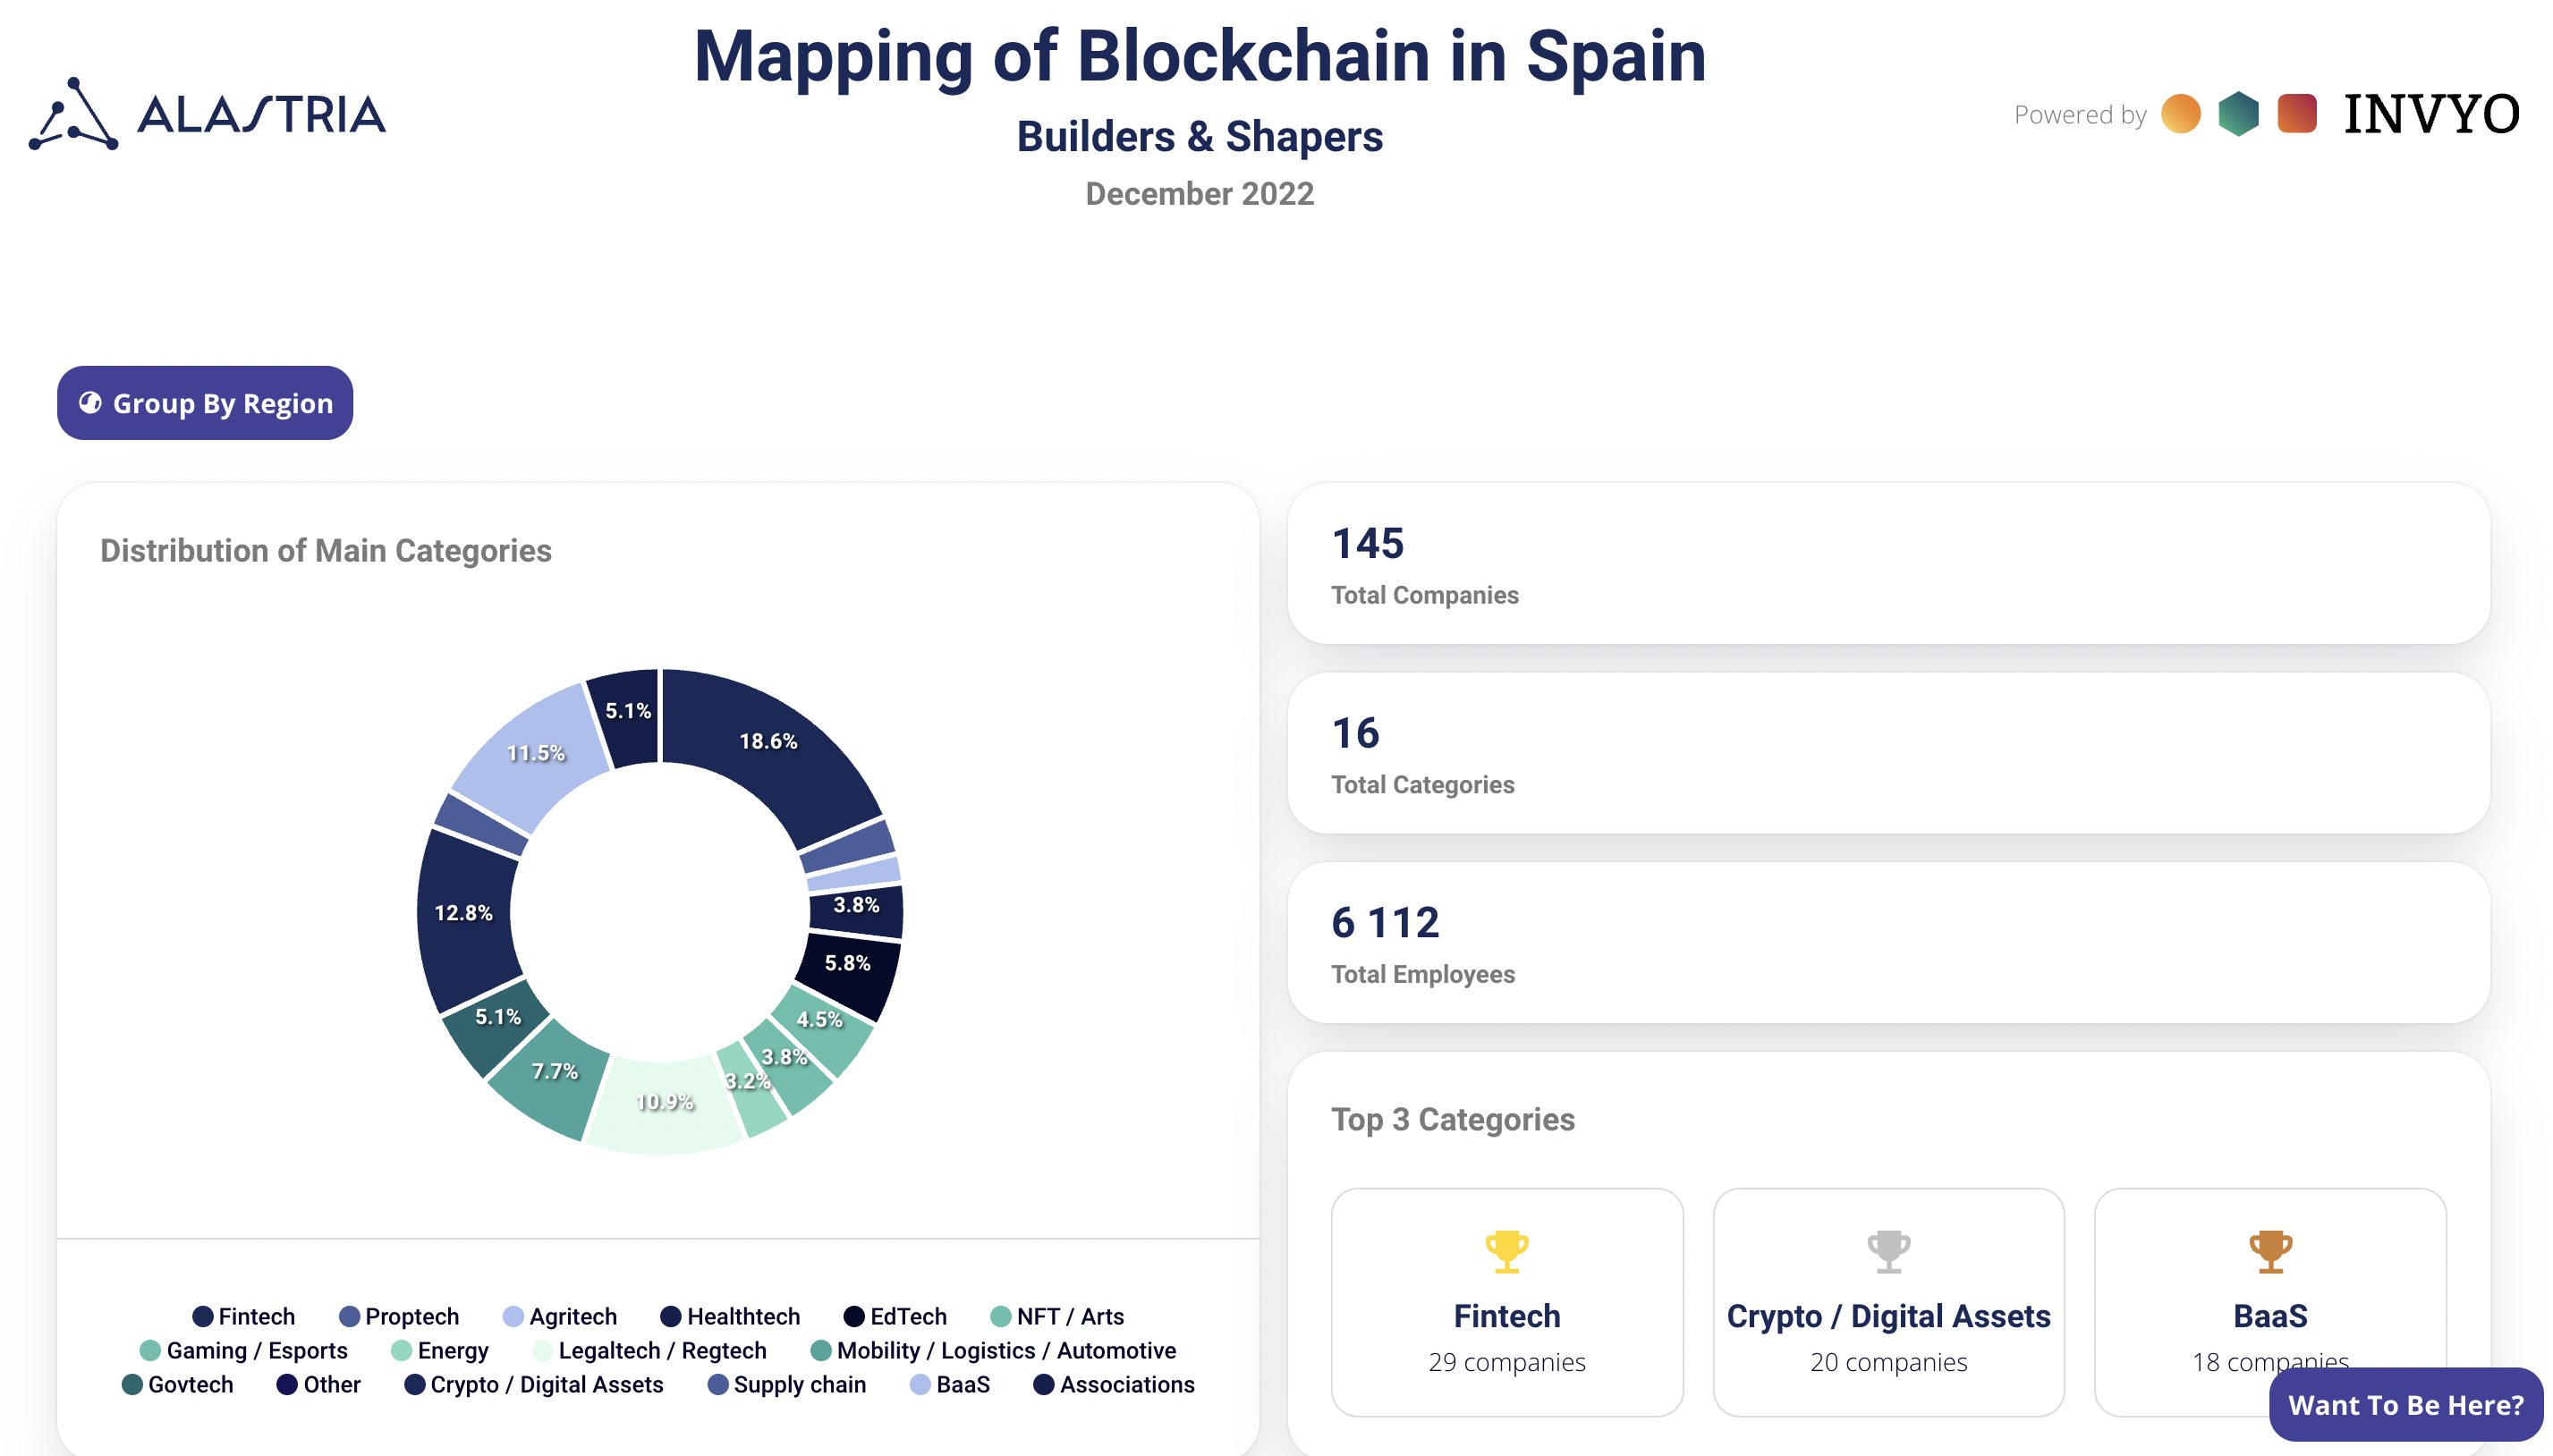 <strong>Alastria launches the first Blockchain Map in Spain</strong>